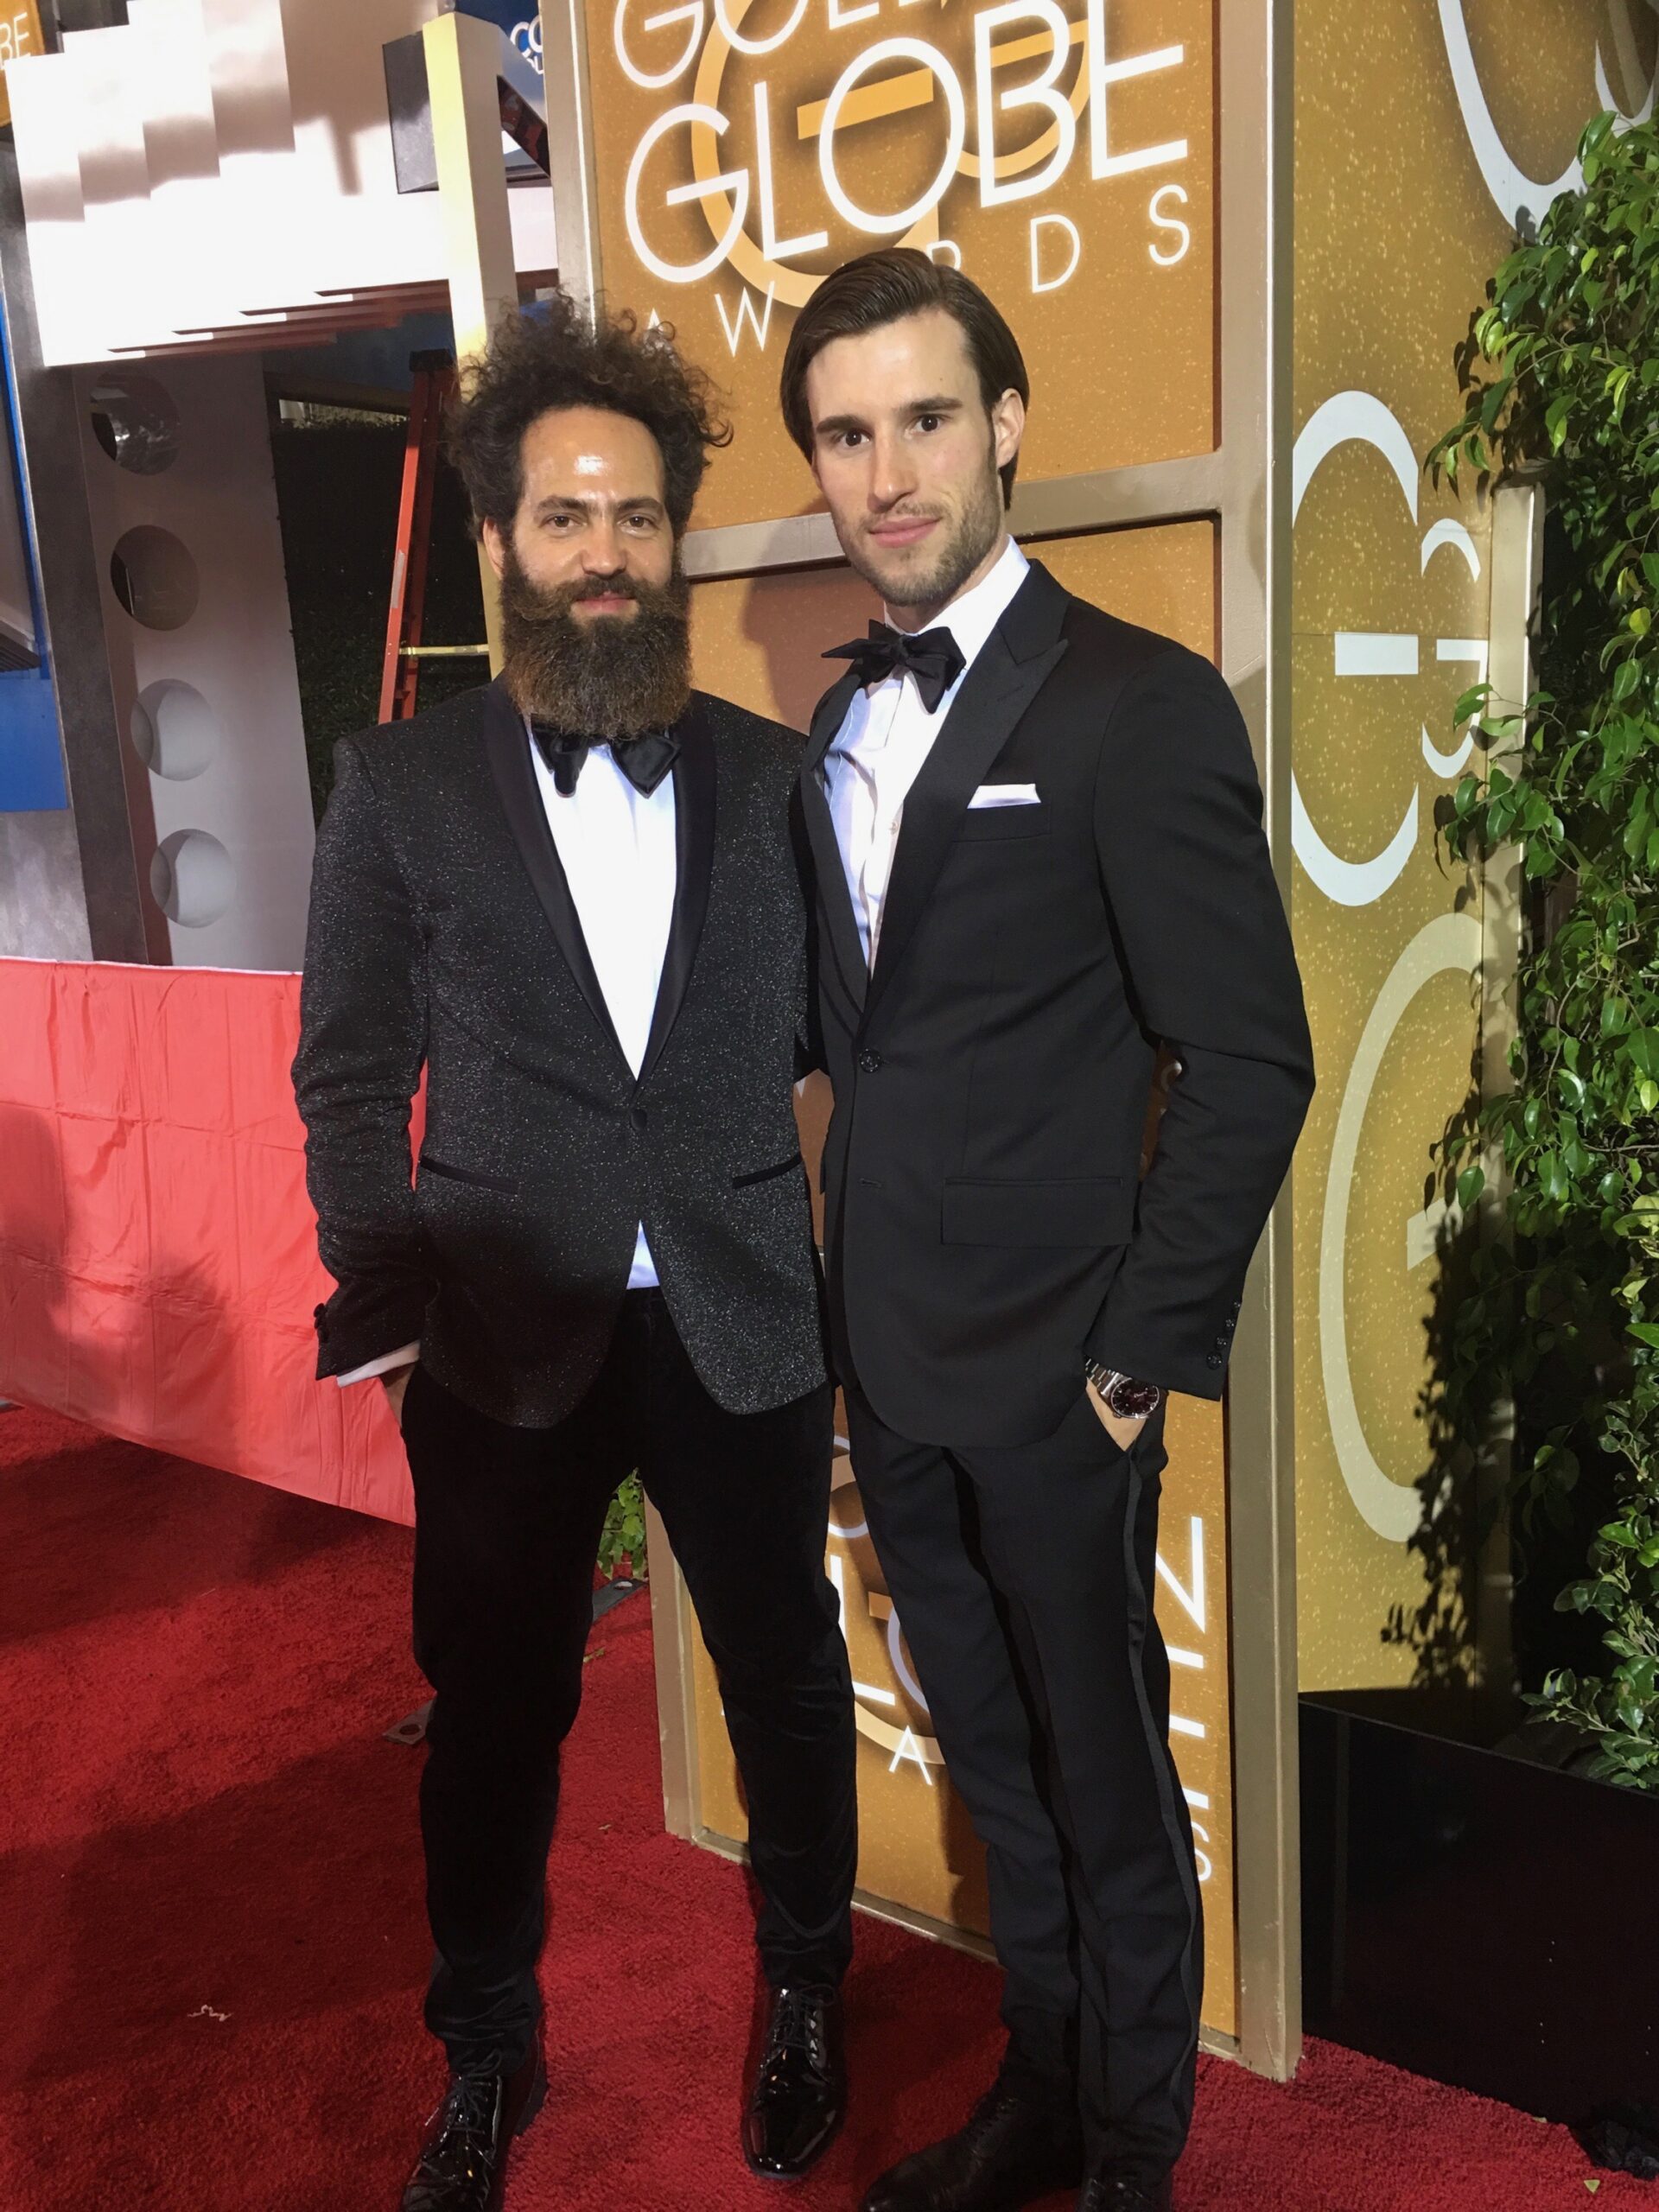 Jean (on the right) attending the Golden Globes